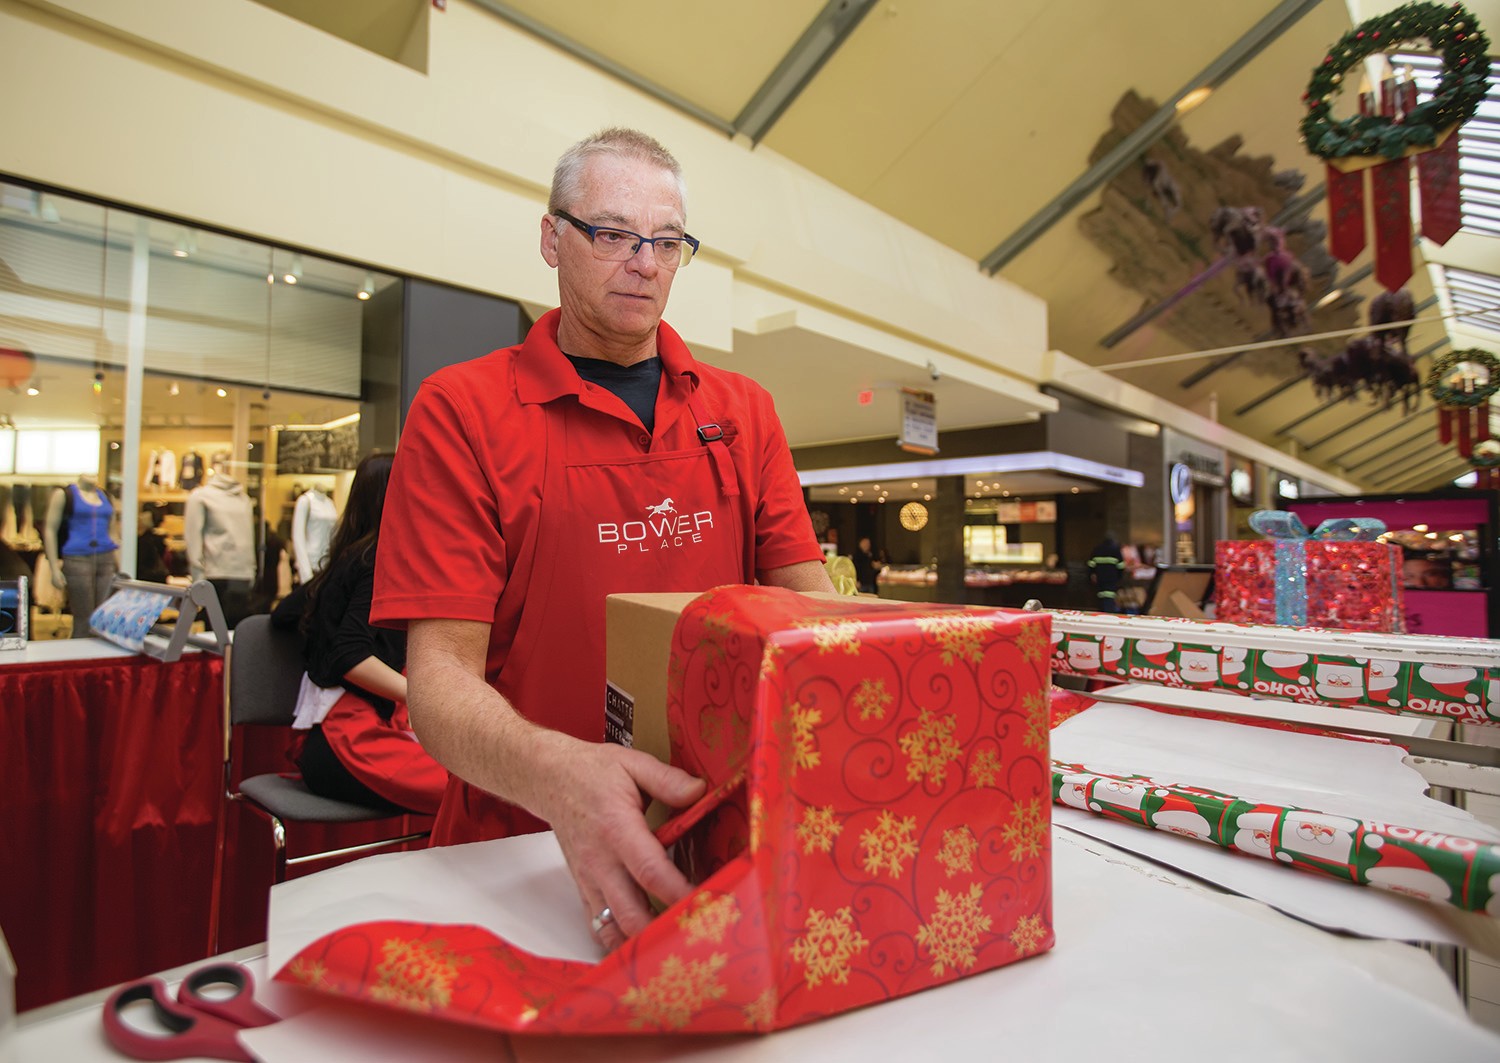 WRAPPING AWAY - Volunteer Serge Gingras measured out wrapping paper for a customer’s gift at the gift wrapping station at Bower Place Shopping Centre earlier this week. All the proceeds from the gift wrapping go towards Women’s Outreach.